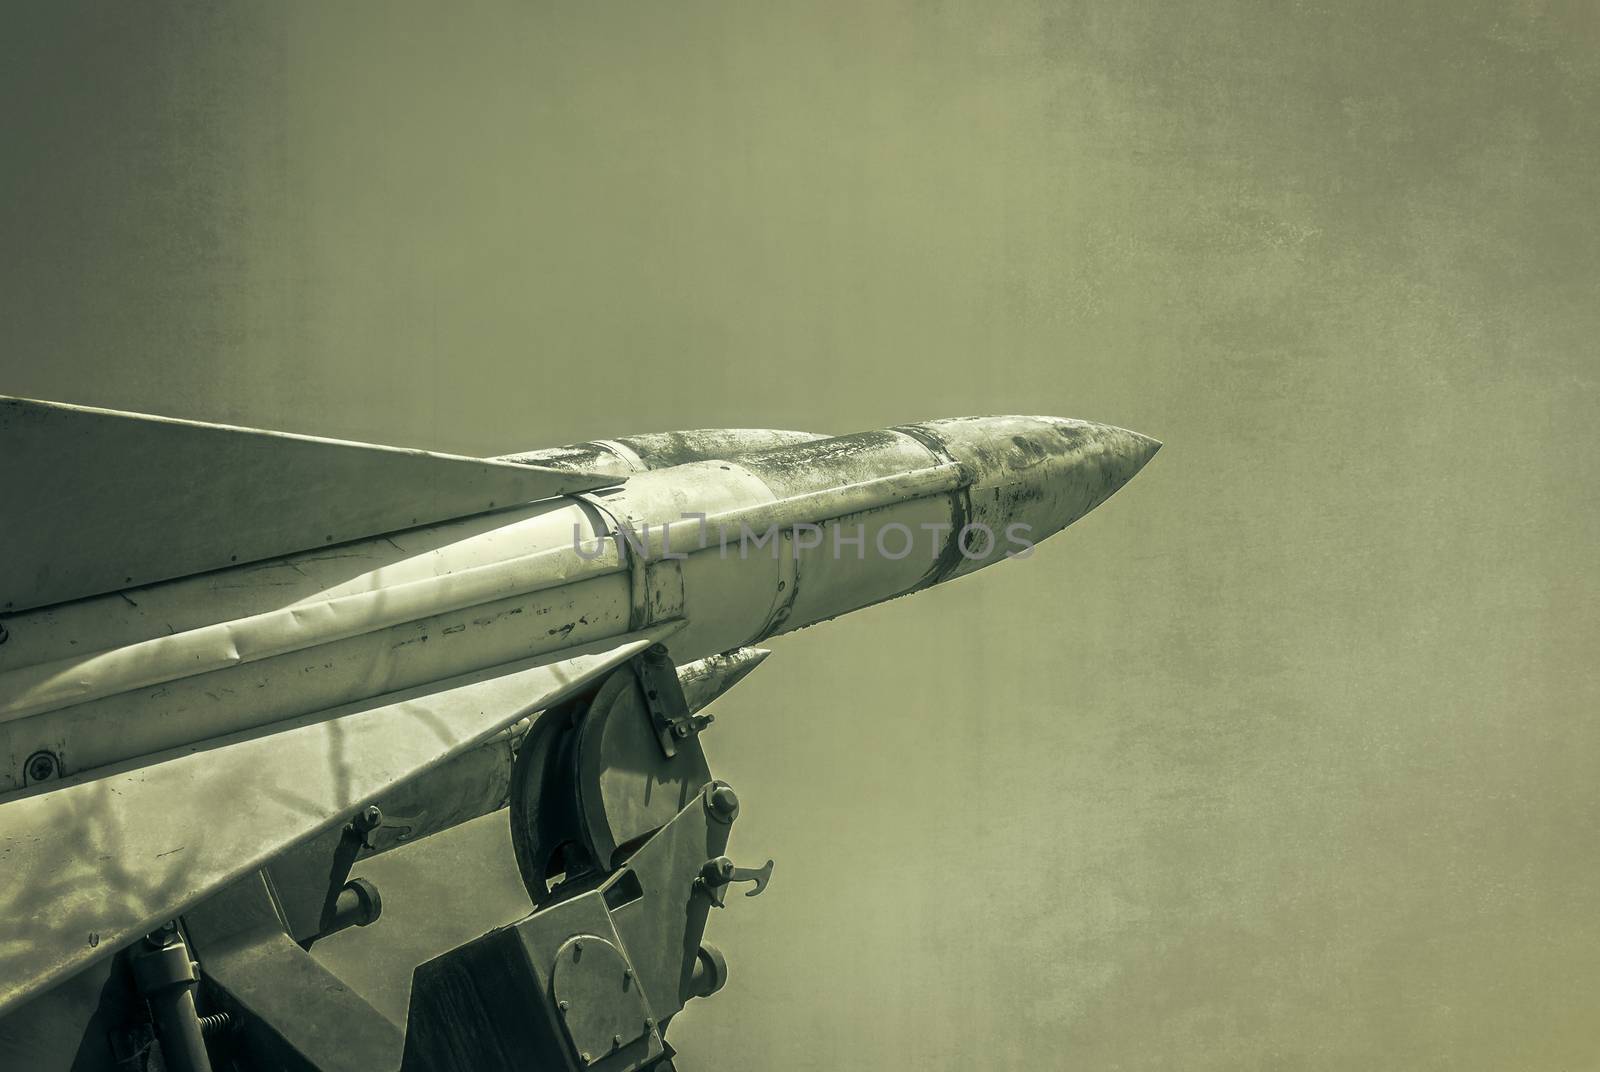 Old russian antiaircraft defense rocket launcher missiles. Grunge Army Missile.  Photo textured in old color image style.